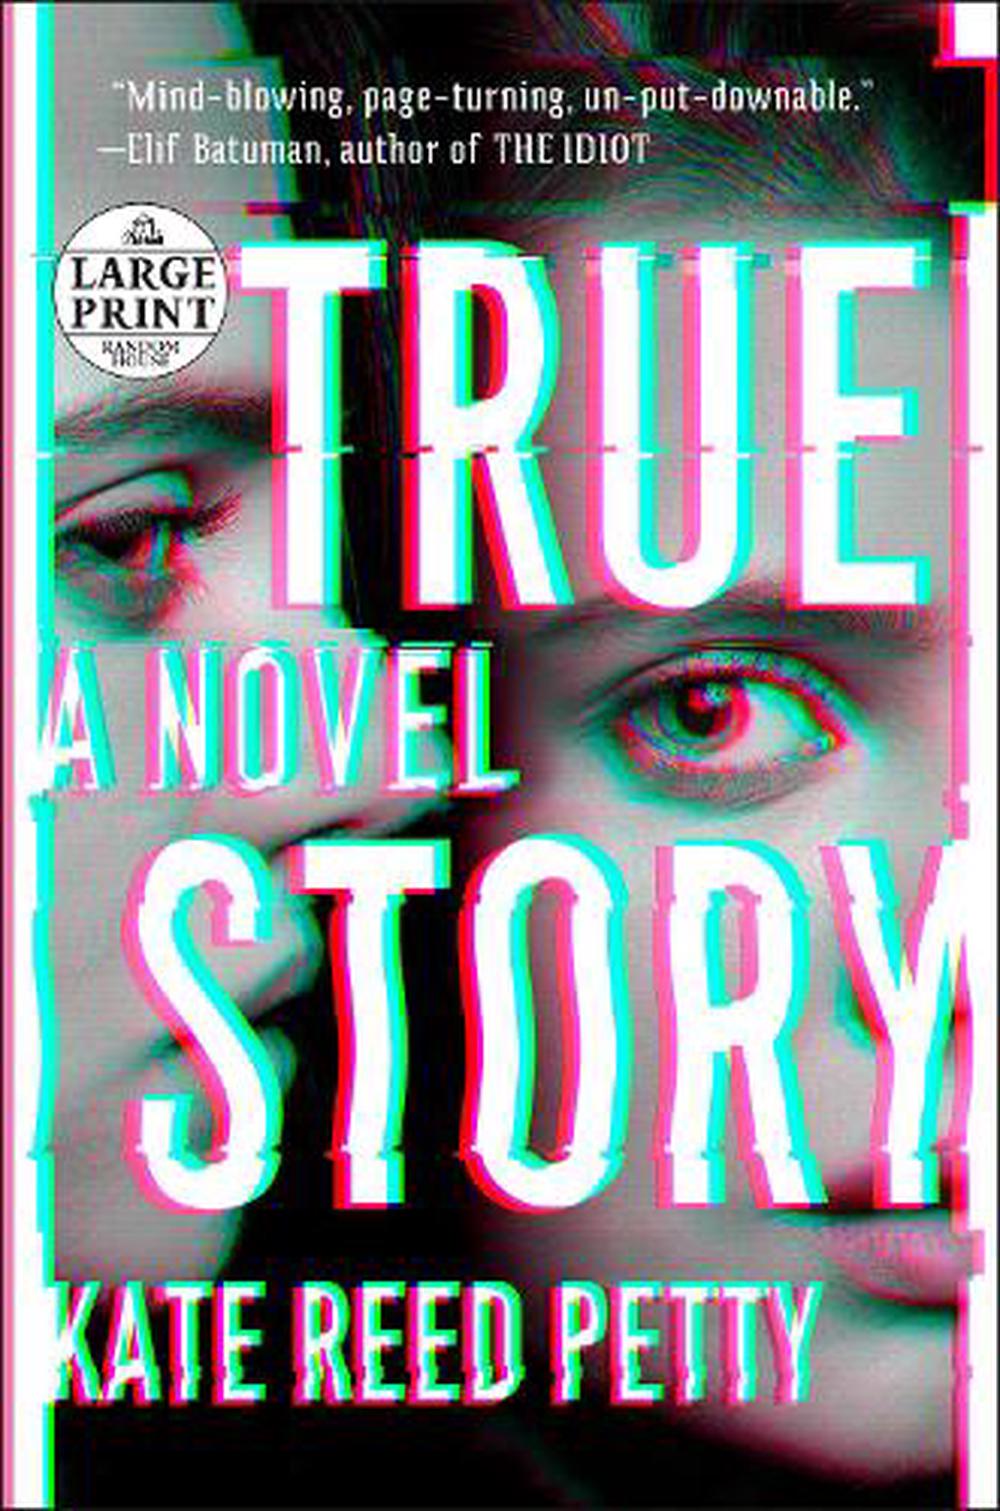 True Story a Novel by Kate Reed Petty (English) Paperback Book Free